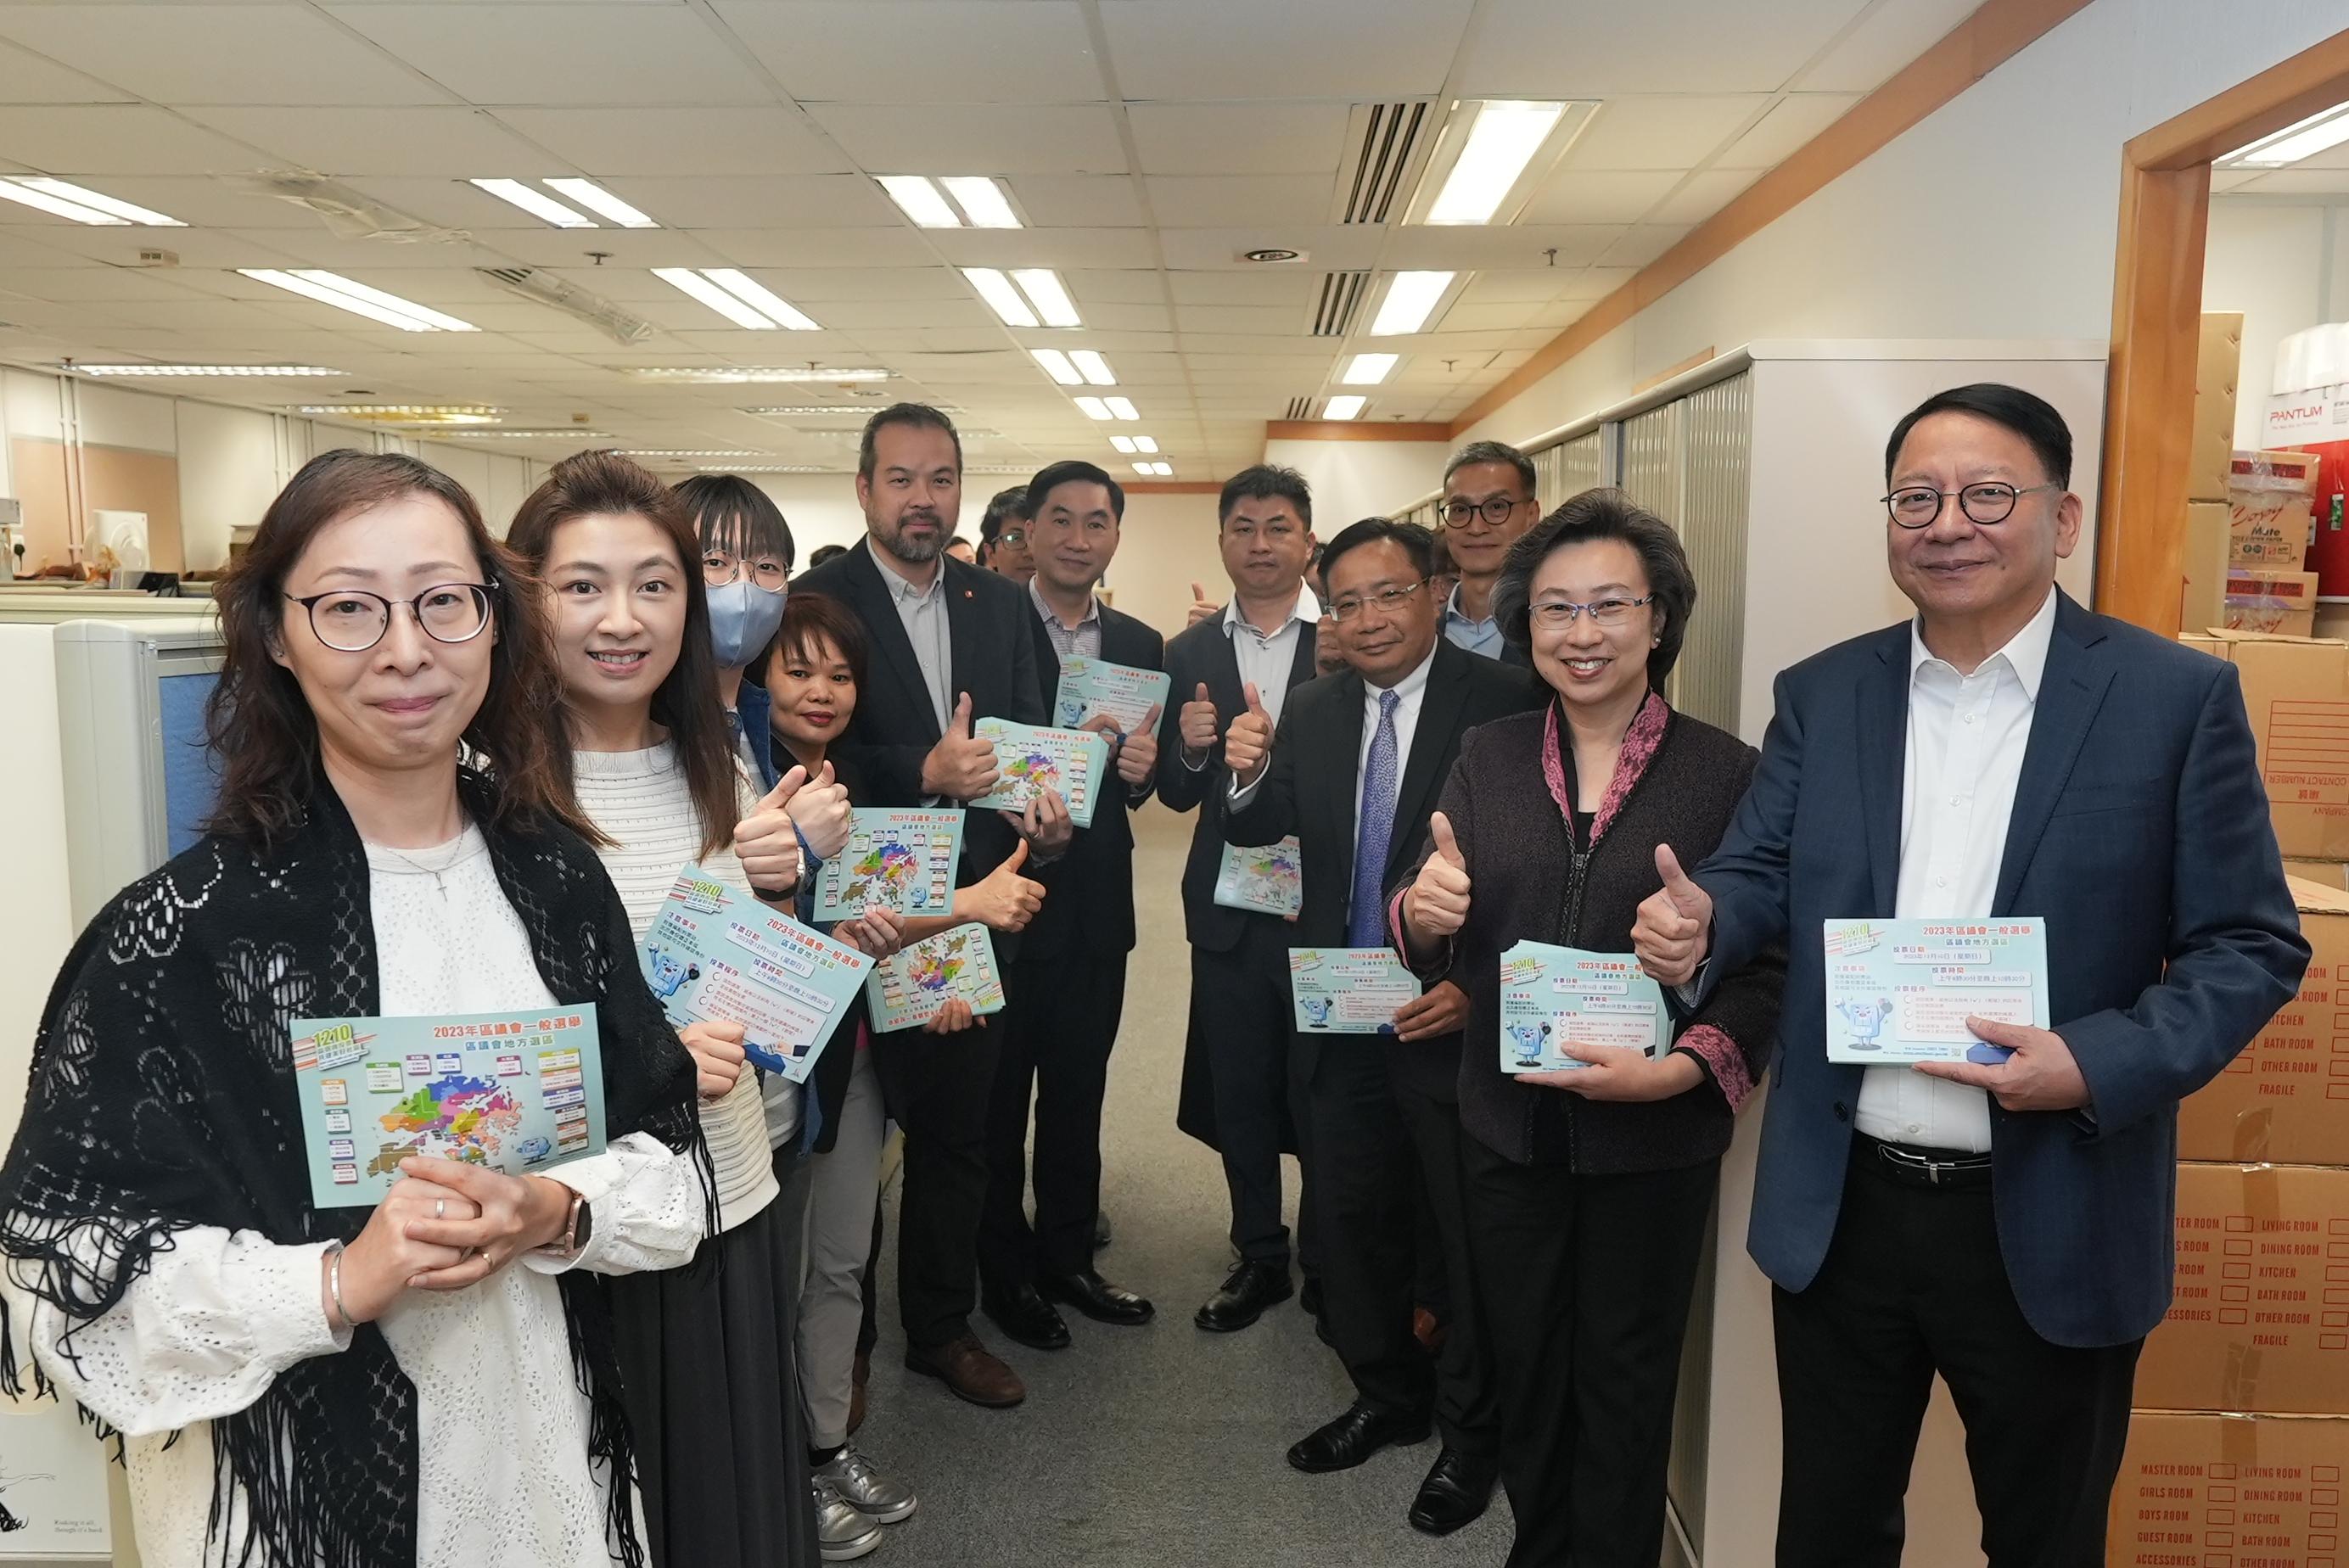 The Chief Secretary for Administration, Mr Chan Kwok-ki, and the Secretary for the Civil Service, Mrs Ingrid Yeung, together with representatives from the four civil service central consultative councils and the four major service-wide staff unions, jointly visited a number of floors of the Queensway Government Offices today (November 29) to promote the District Council (DC) election to colleagues and appeal to them to cast their votes with their families and friends on December 10 to discharge their civic responsibility. Photo shows Mr Chan (first right); Mrs Yeung (second right); and the Commissioner for Innovation and Technology, Mr Ivan Lee (third right), are pictured with representatives of civil service groups and colleagues from the Innovation and Technology Commission at their workplace to express support for the DC election and voting together. 